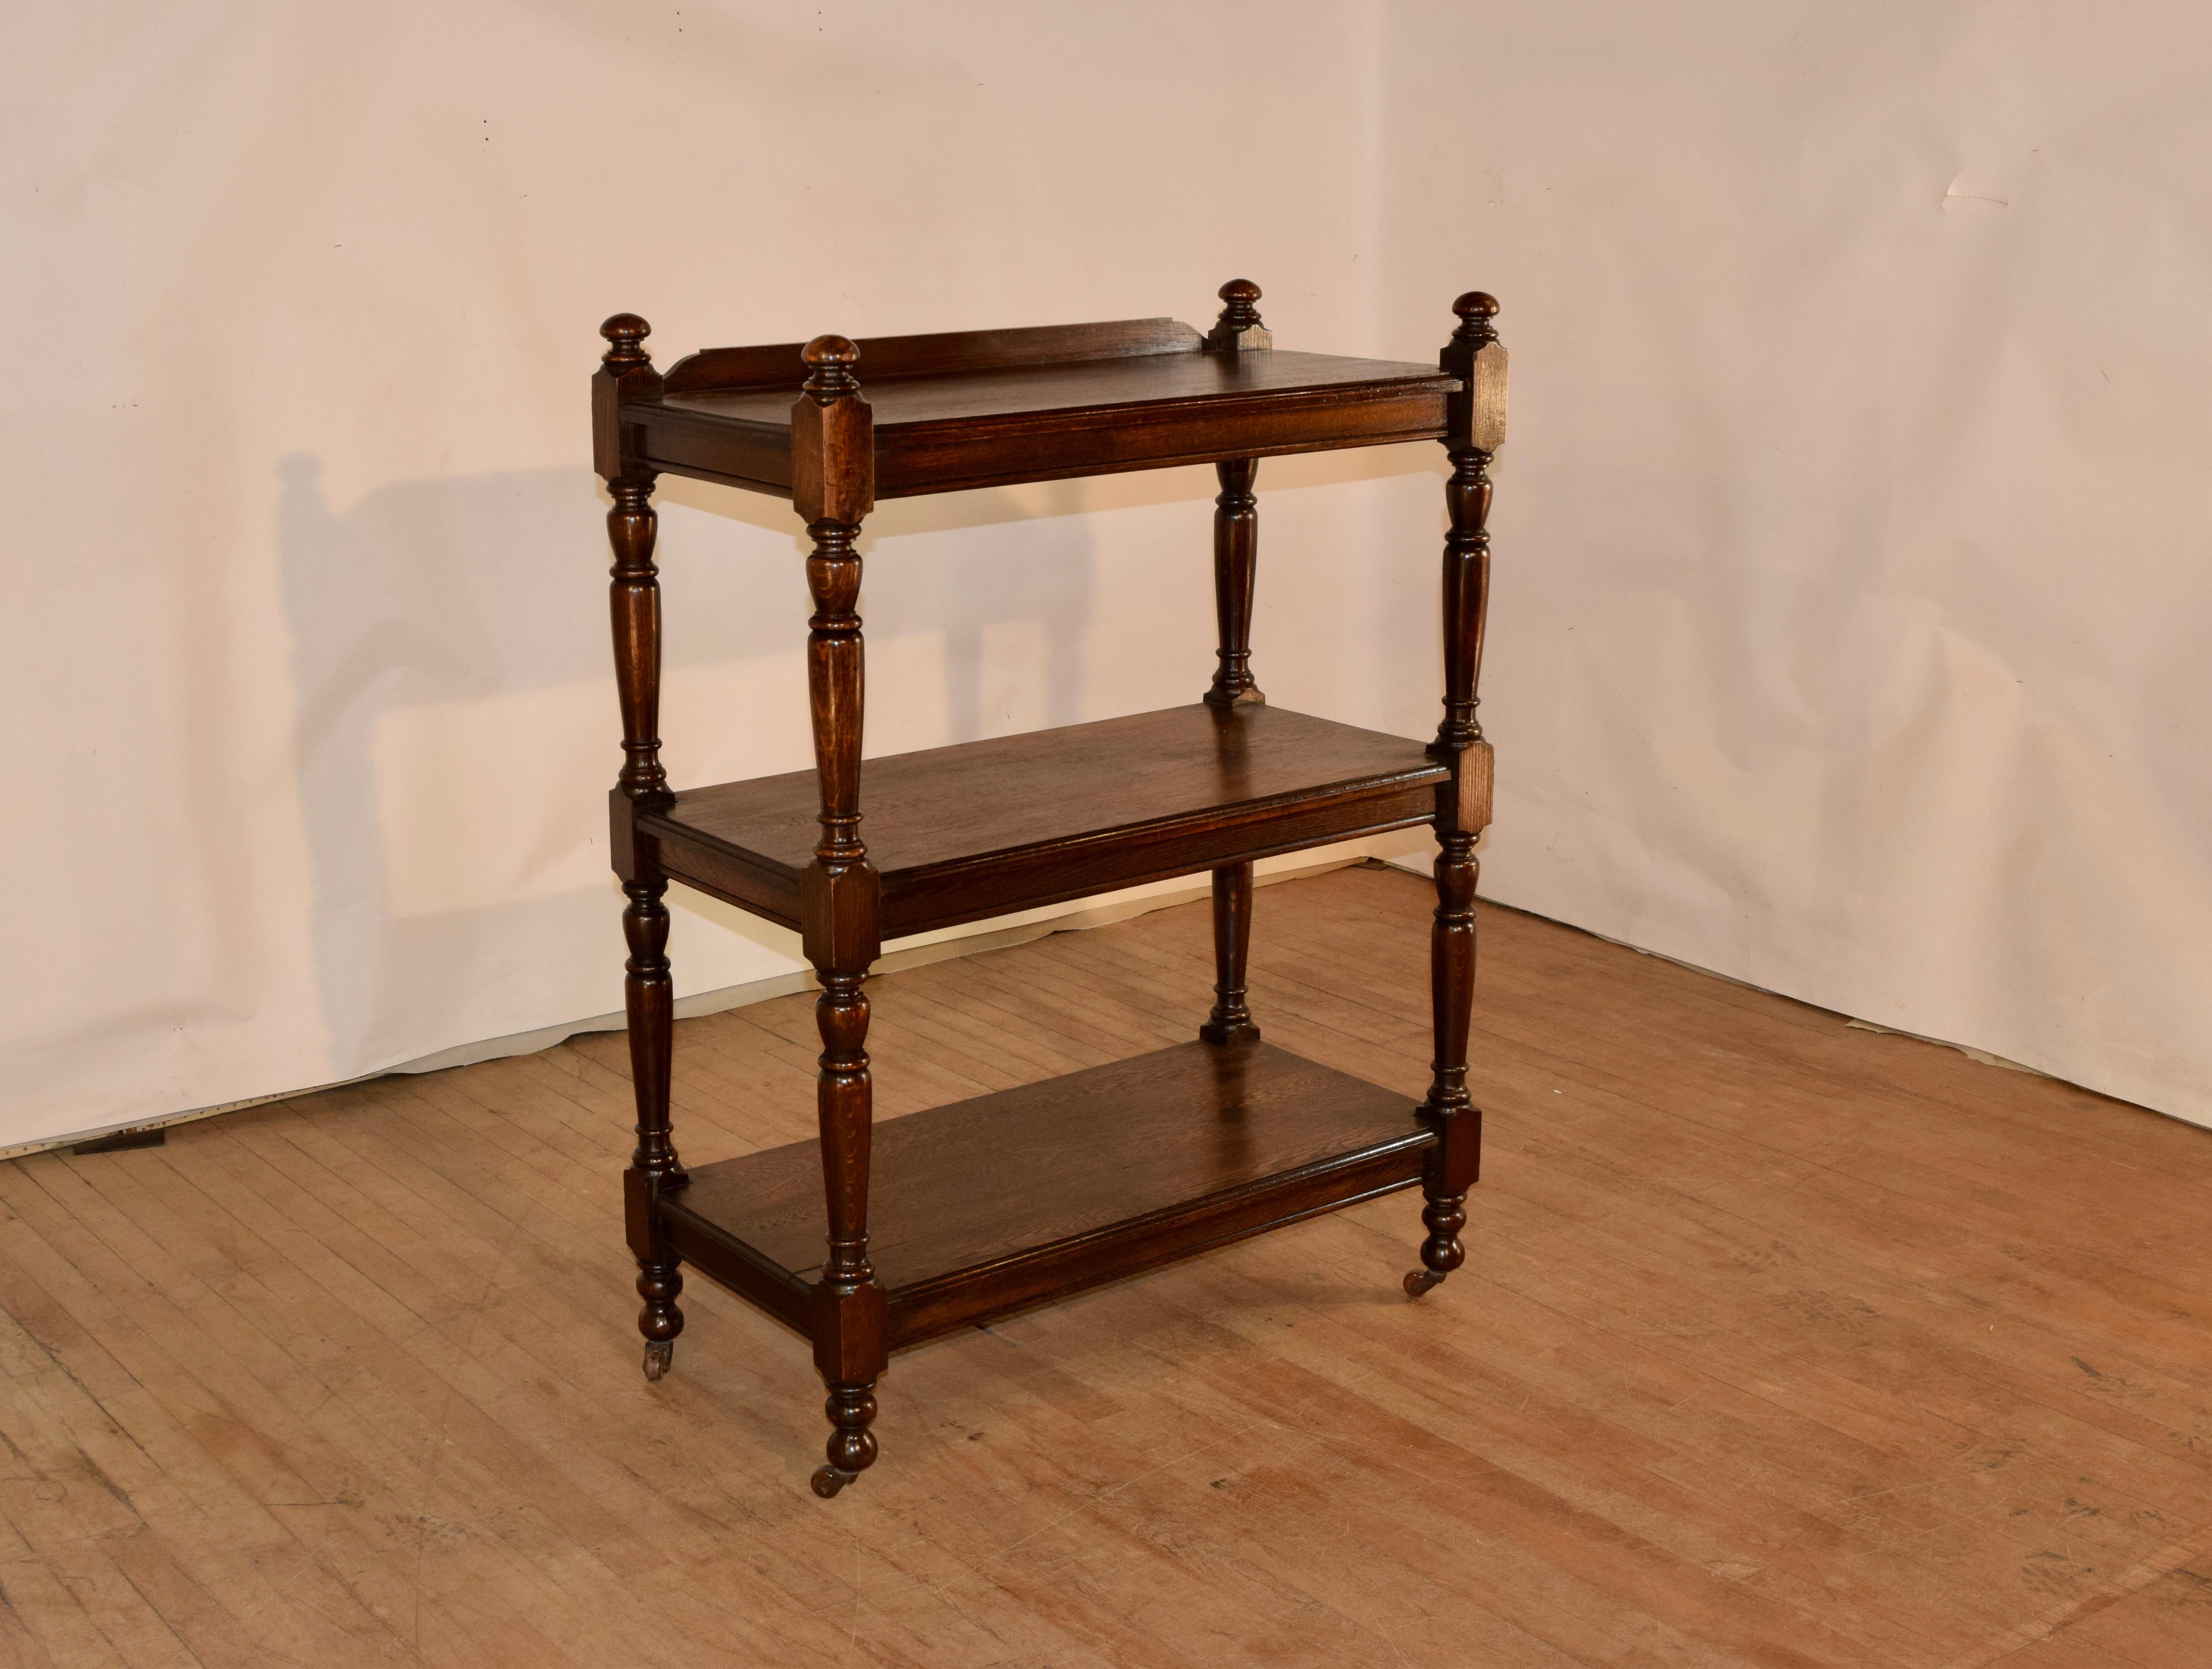 19th century oak dessert buffet from England with a shaped backsplash on the top and three shelves.  The legs are hand turned and also serve as the shelf supports.  They are adorned with hand turned finials at the top and retain what appear to be